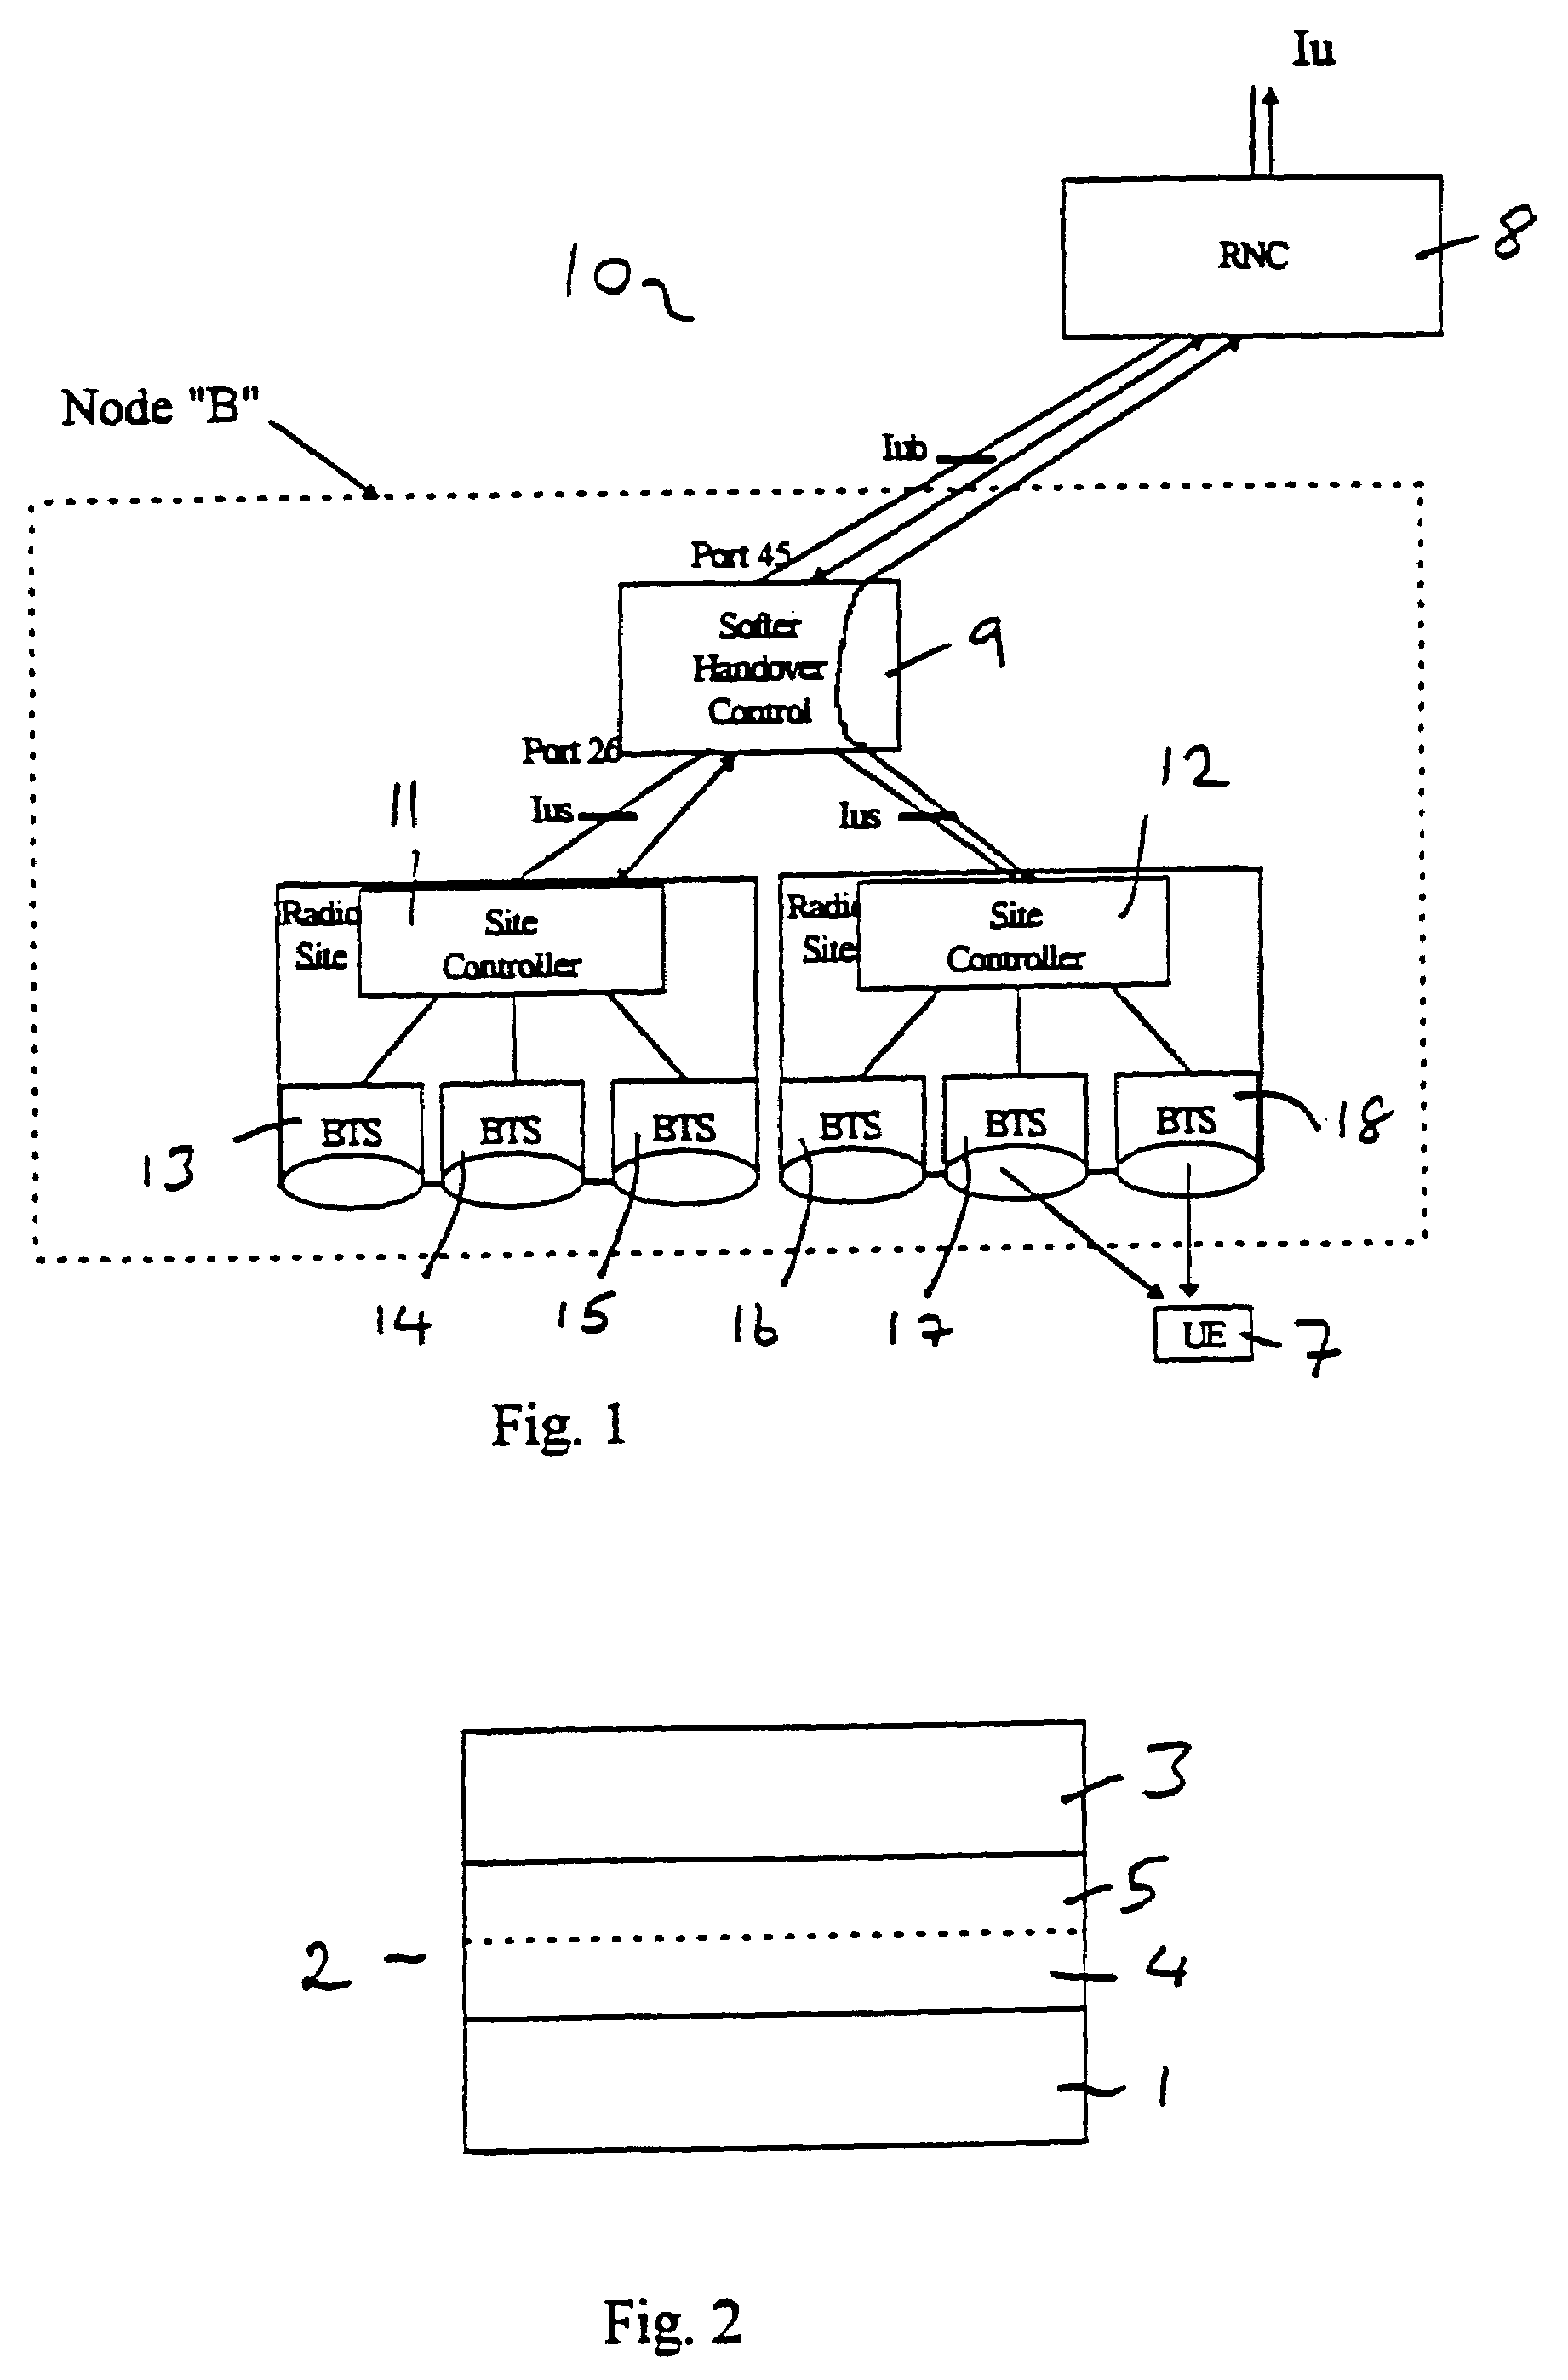 Method and apparatus for changing radio link configurations in a mobile telecommunications system with soft handover